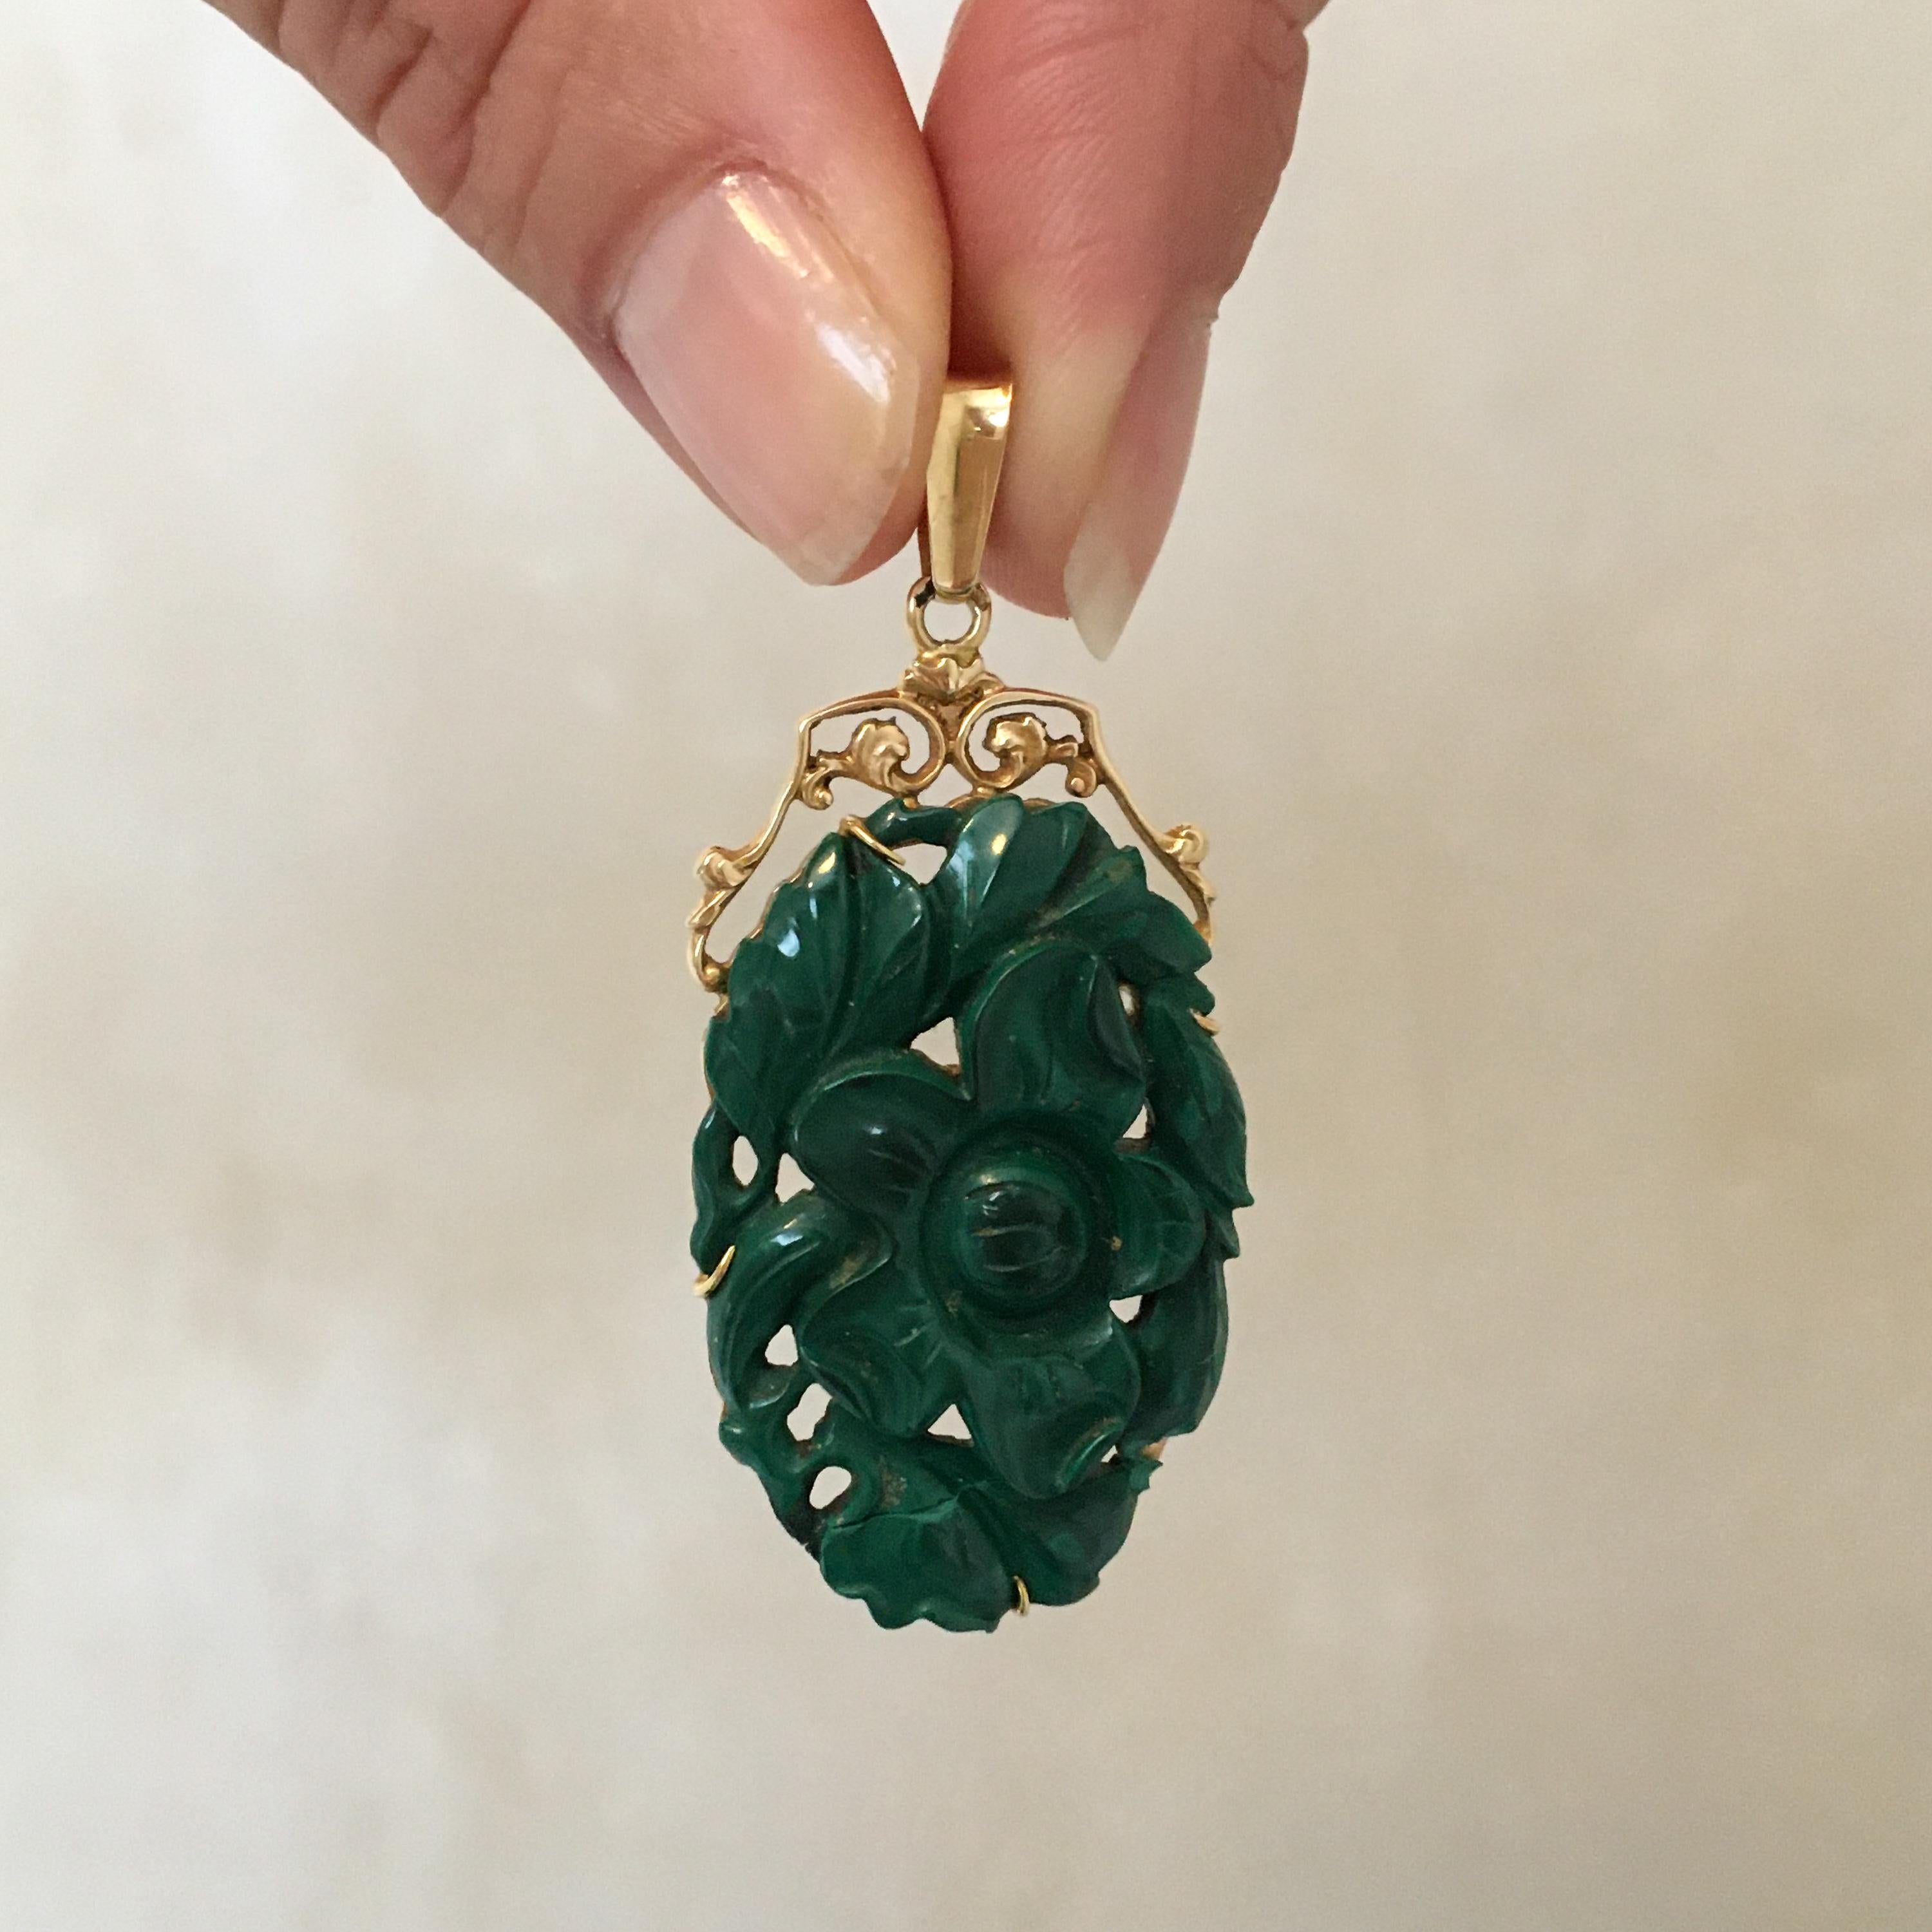 A vintage floral carved green stone pendant set in a 14 karat gold frame. The pendant features a large dark green stone and is beautifully carved into a floral design. The stone is securely set between 14 karat gold prongs and the top of the gold